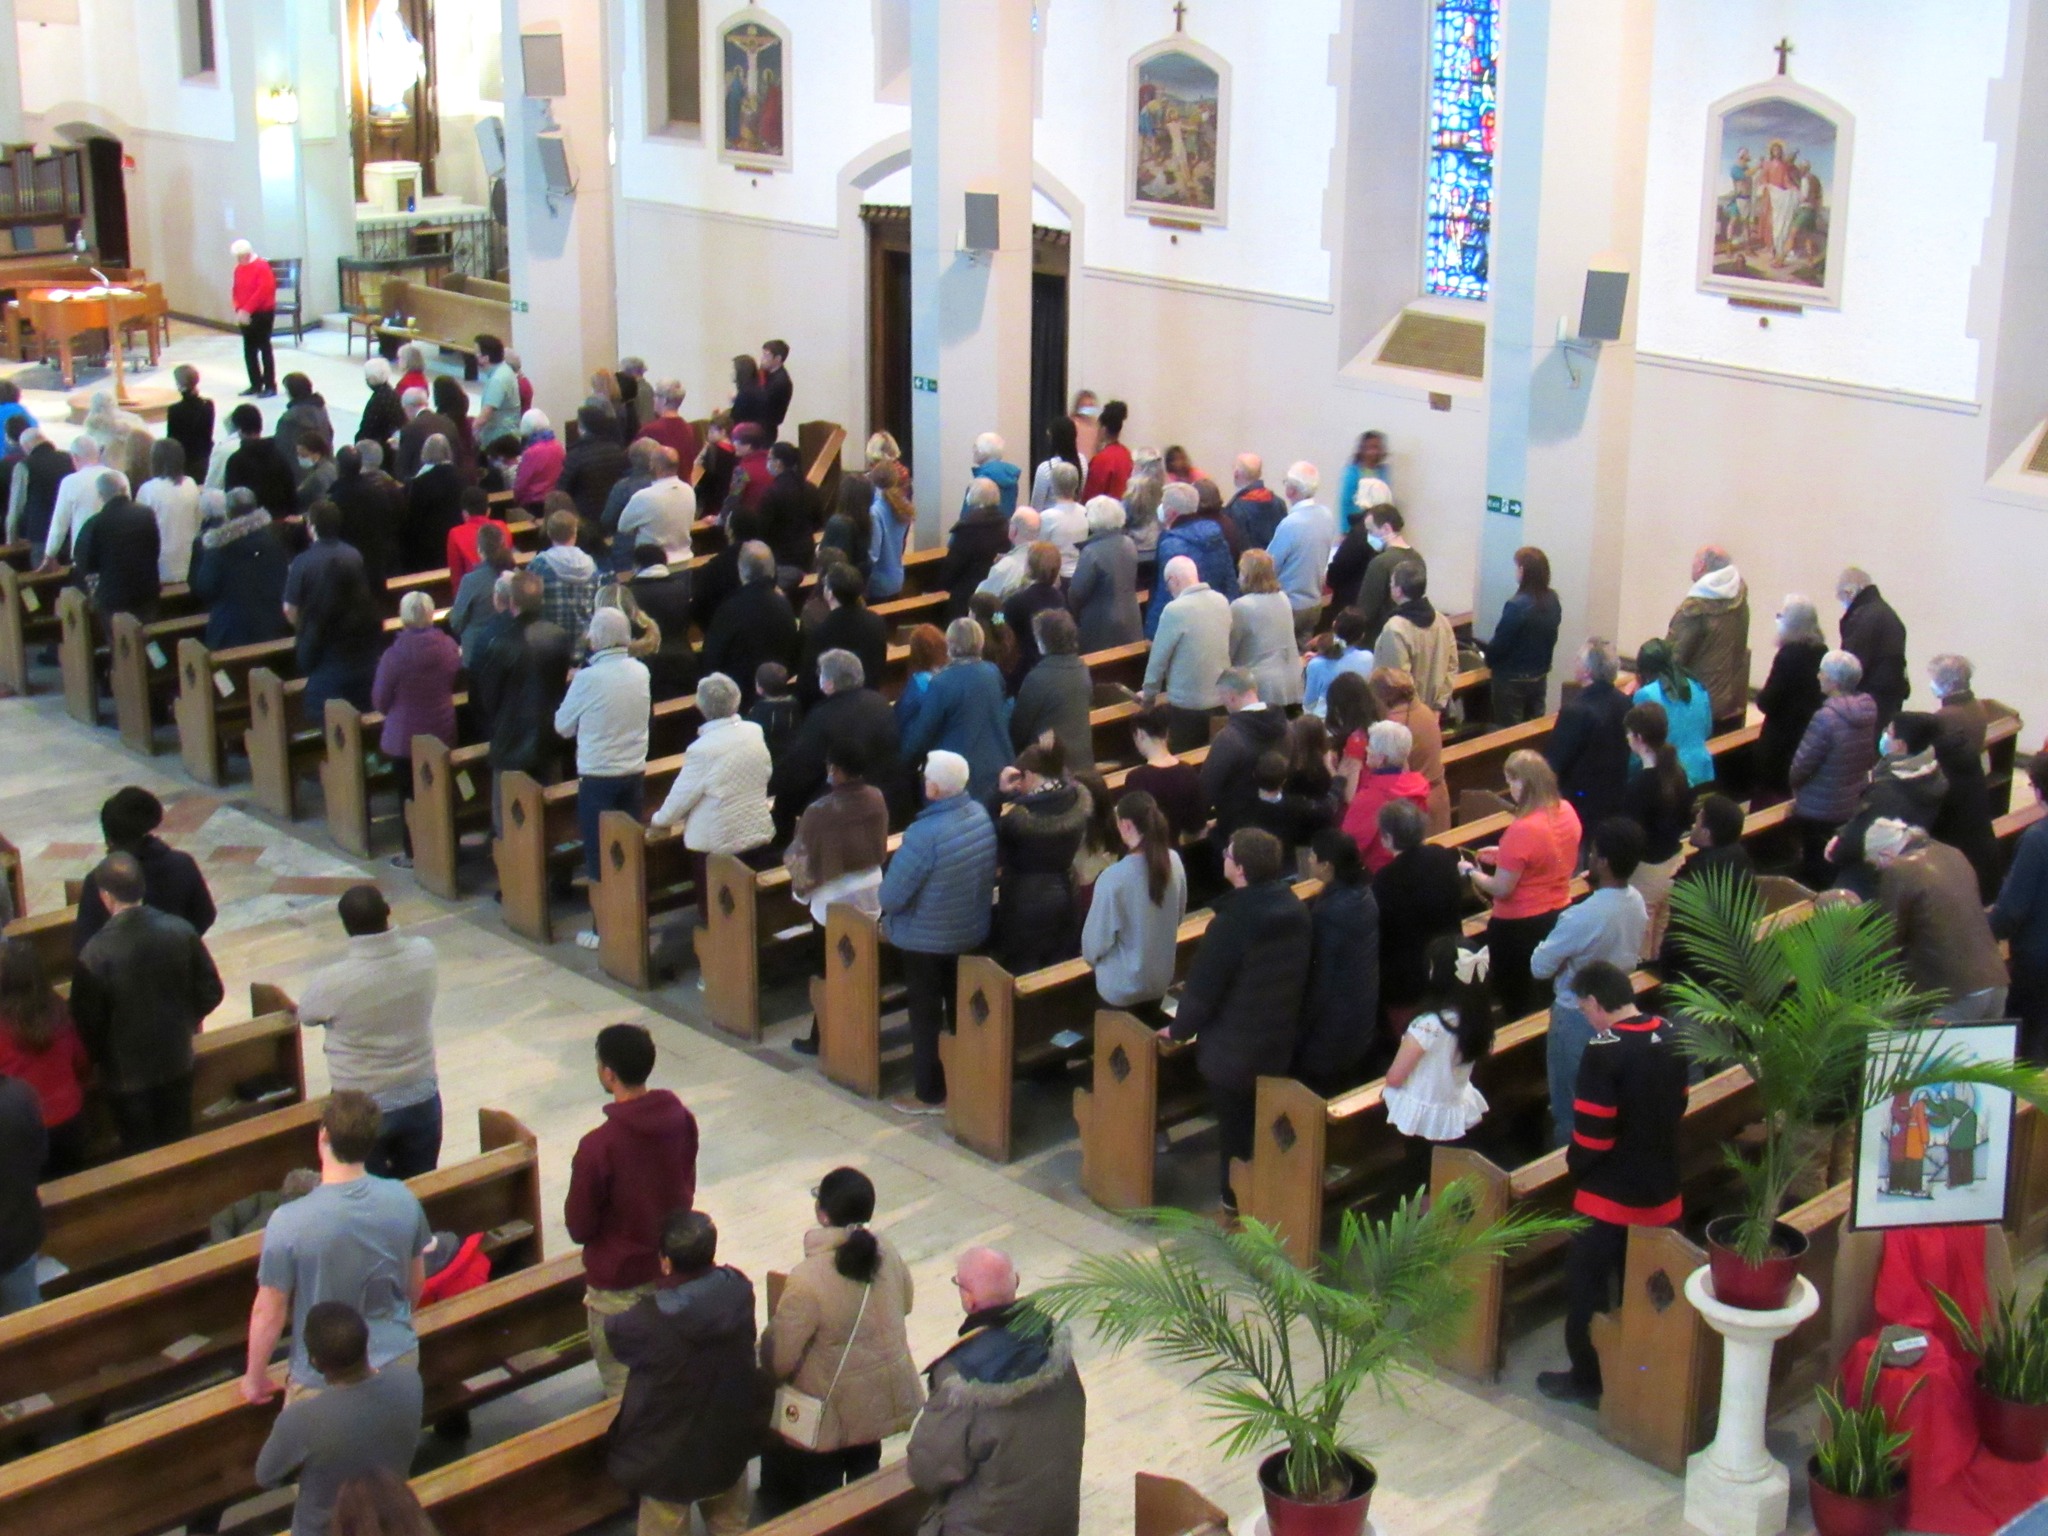 The congregation from above (west-side)